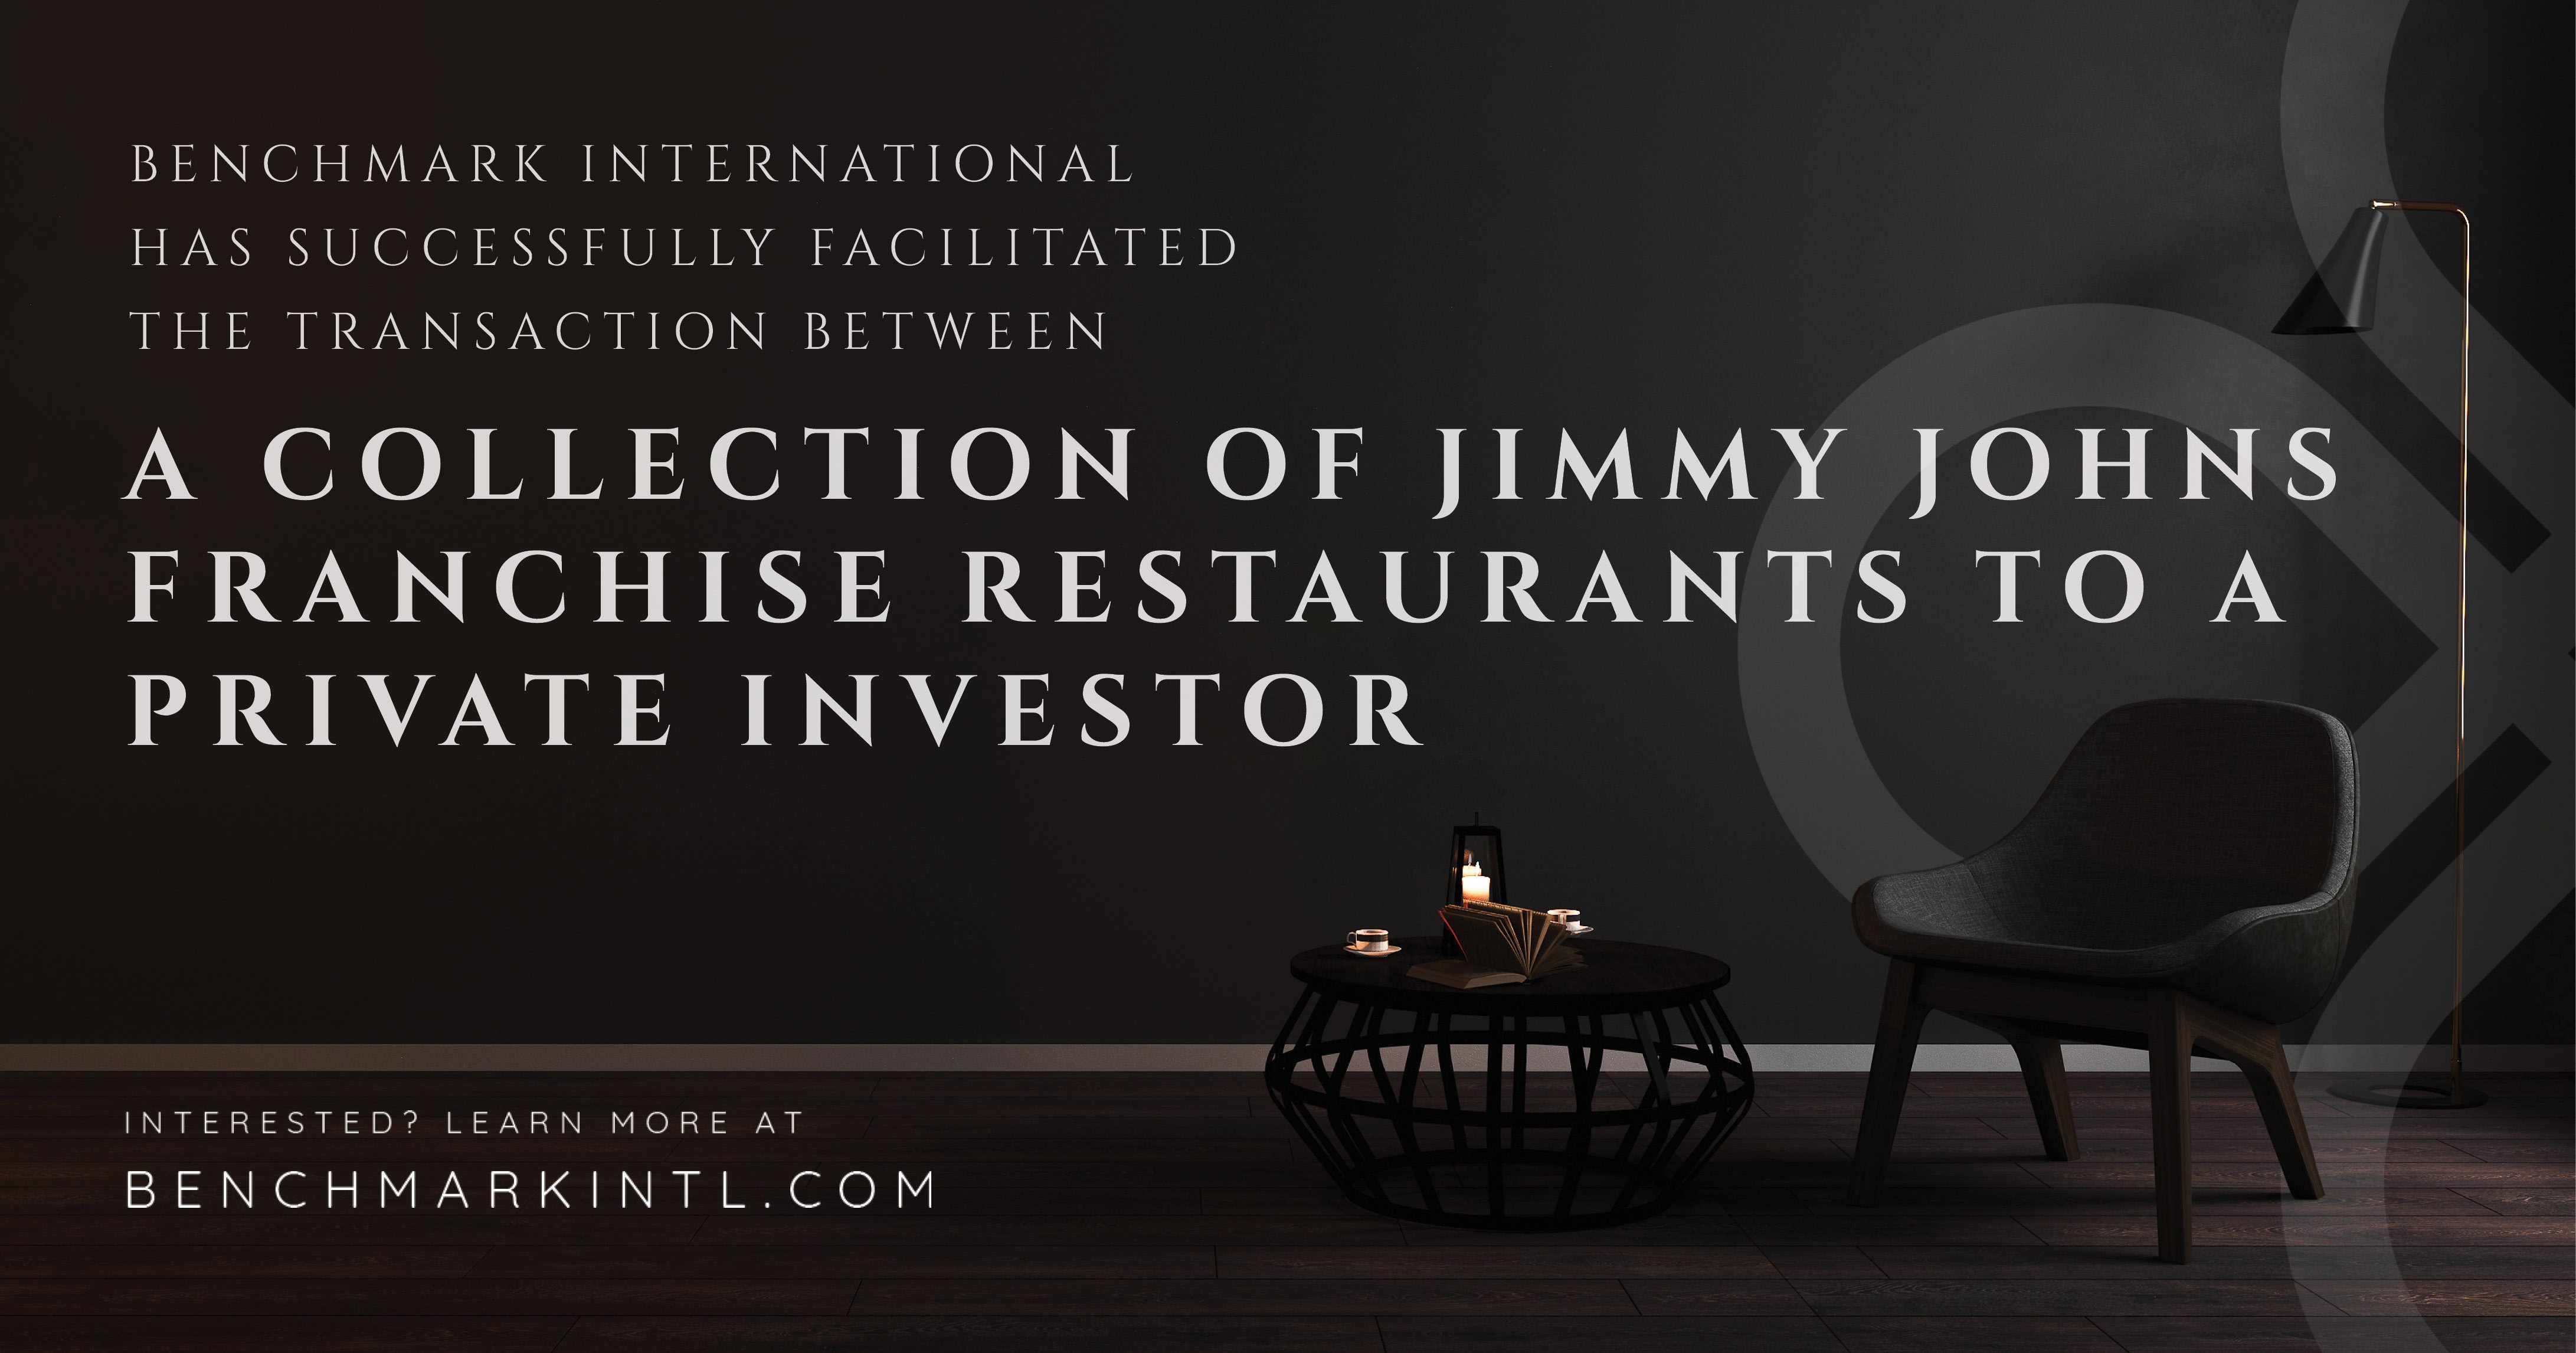 Benchmark International Successfully Facilitated The Transaction Of A Collection Of Jimmy Johns Franchise Restaurants To A Private Investor